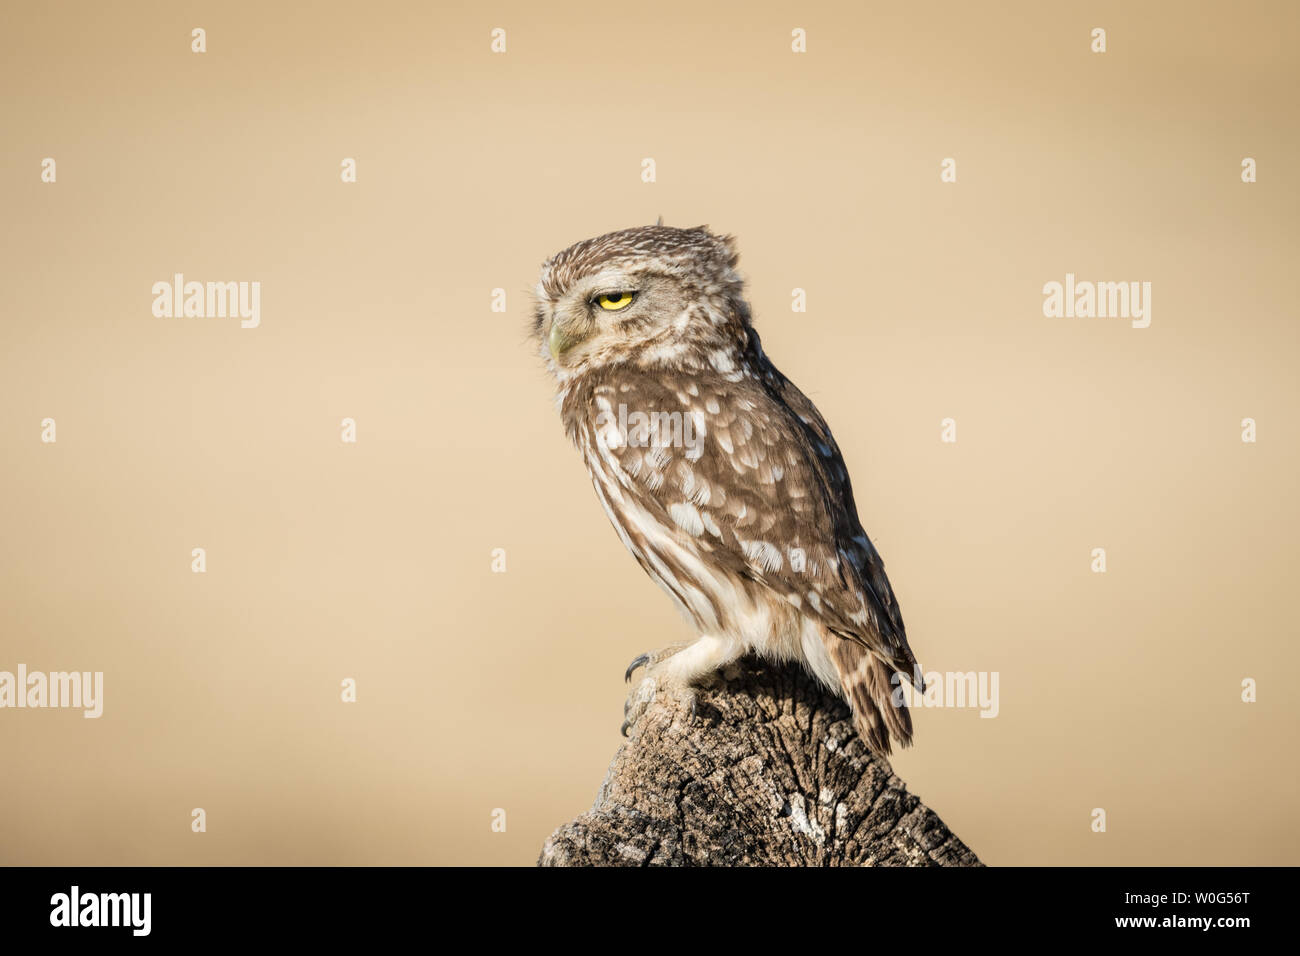 Adult Little Owl (Athene noctua), perched on a trunk, Lleida, Catalonia, Spain Stock Photo